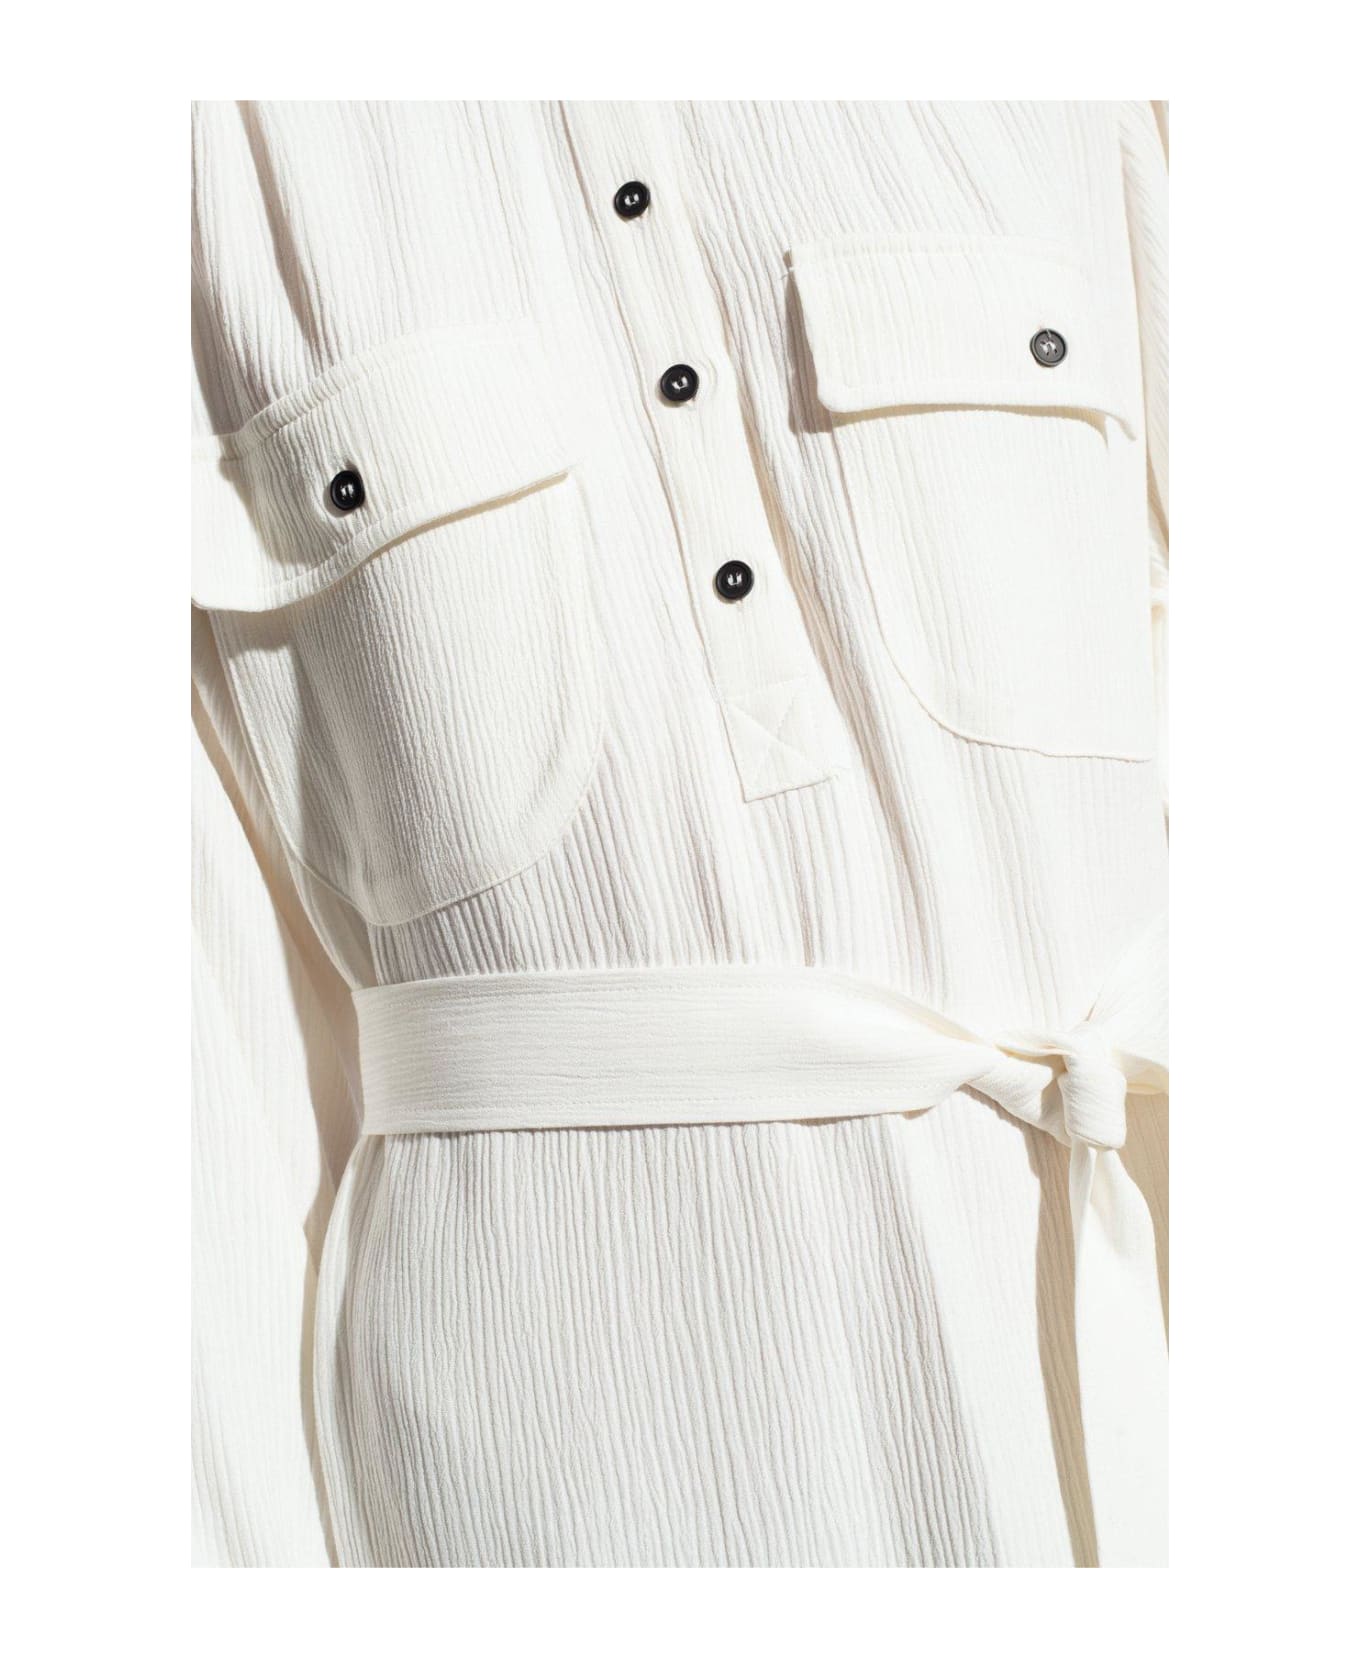 A.P.C. Marla Crinkled Belted Maxi Shirt Dress